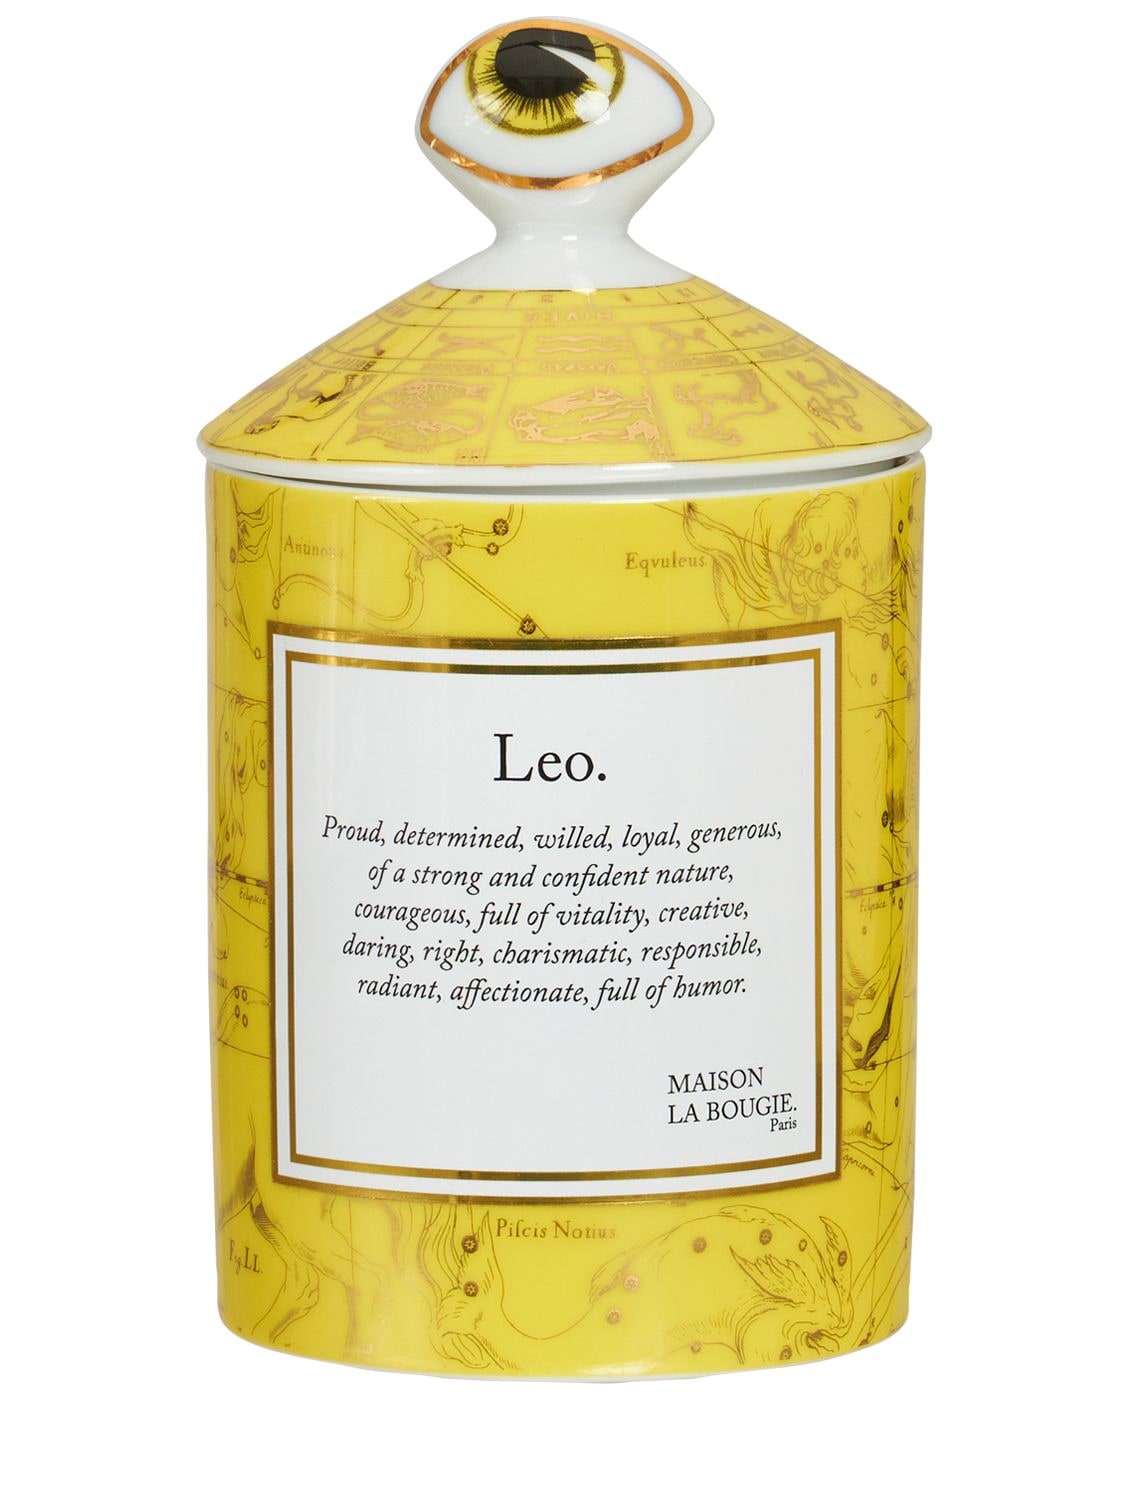 Maison La Bougie 300克leo Zodiac Scented Candle香氛蜡烛 In Yellow